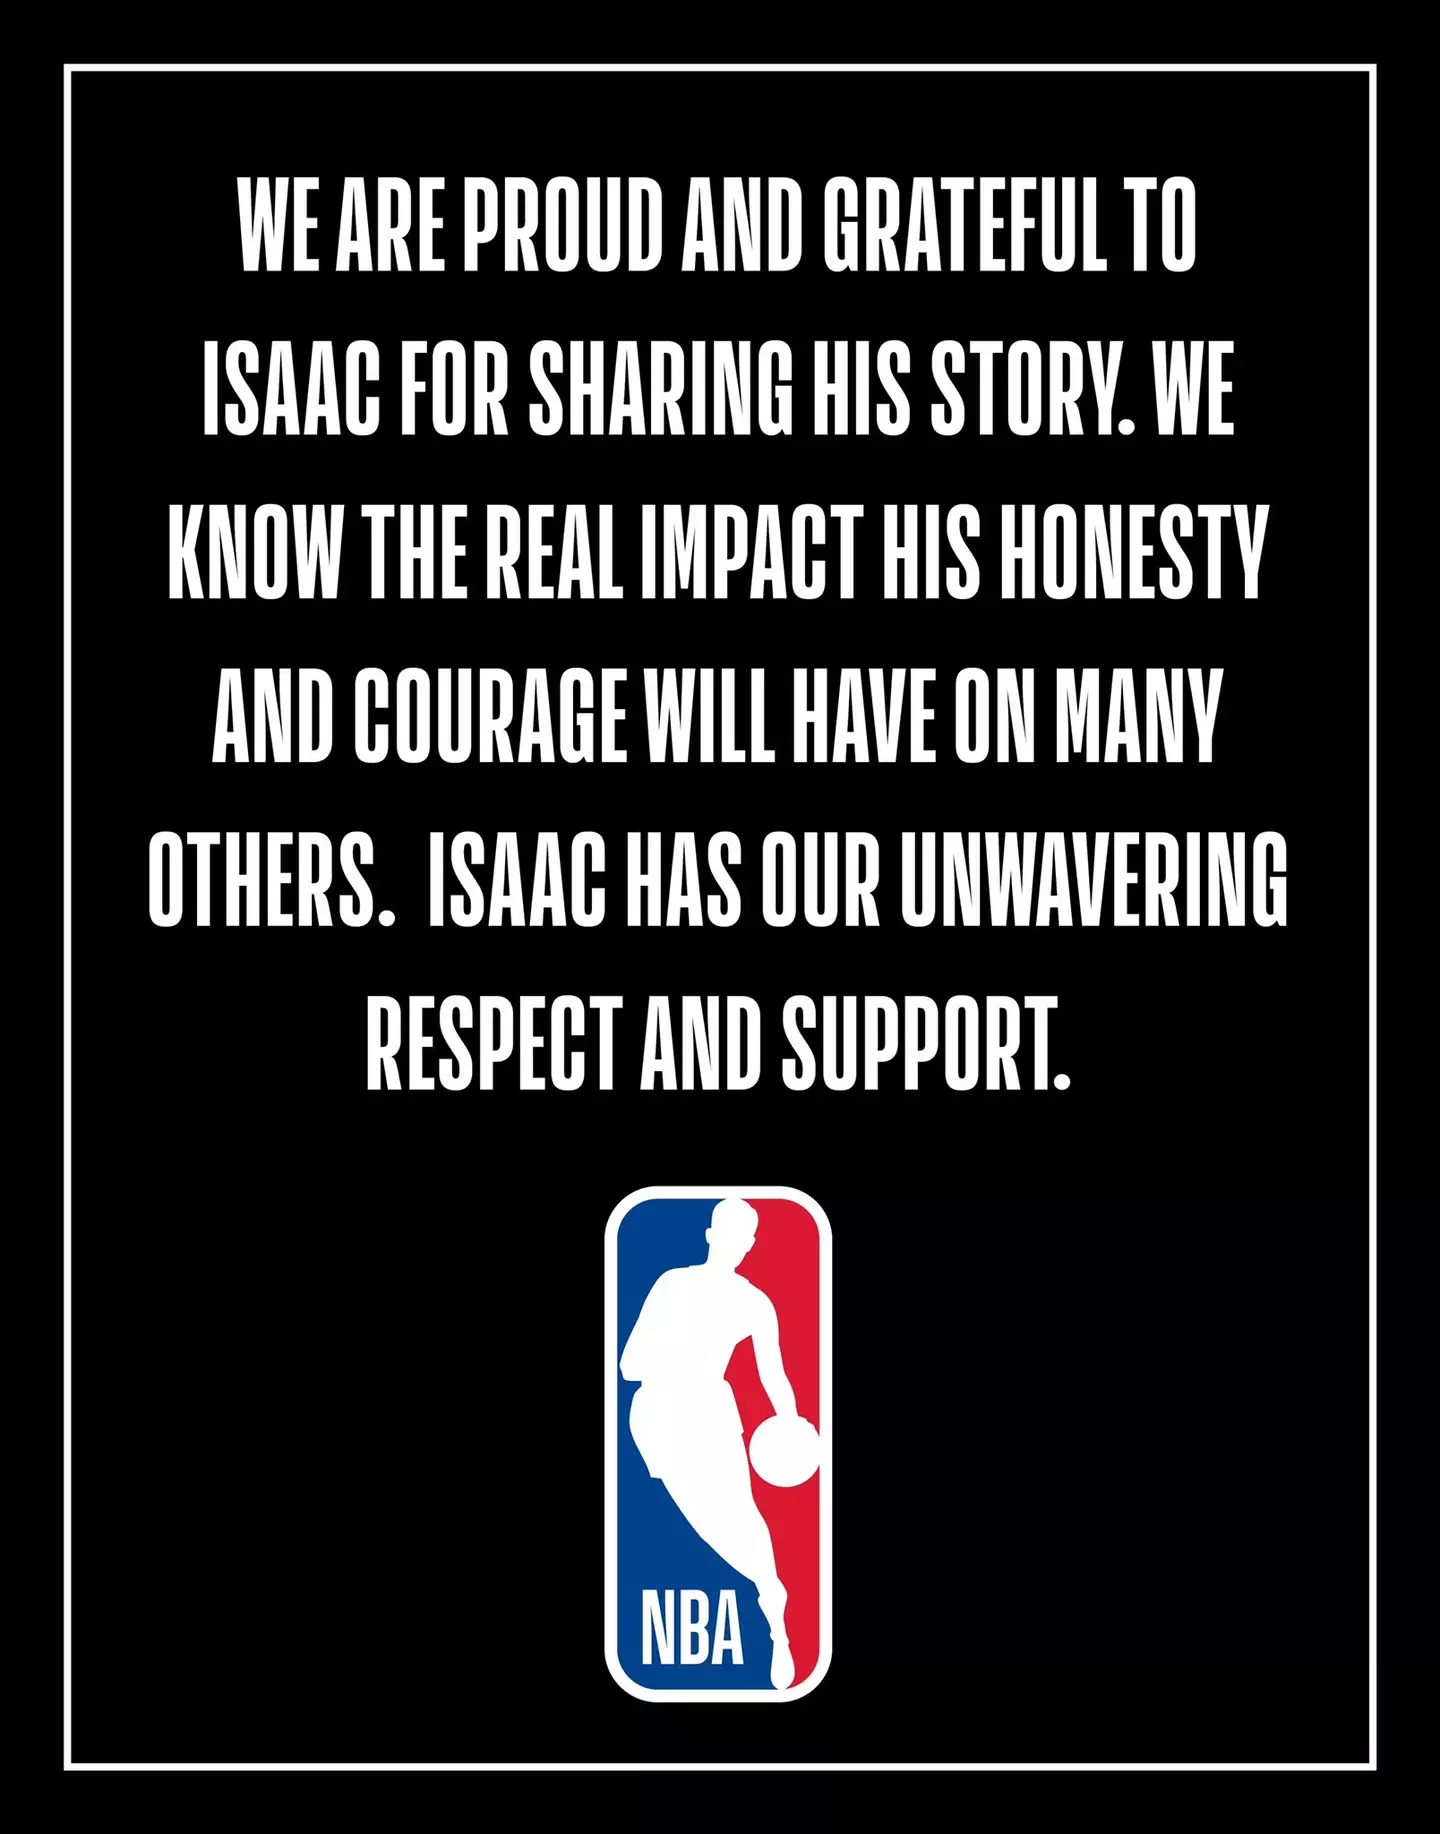 The NBA also responded to Humphries' announcement.